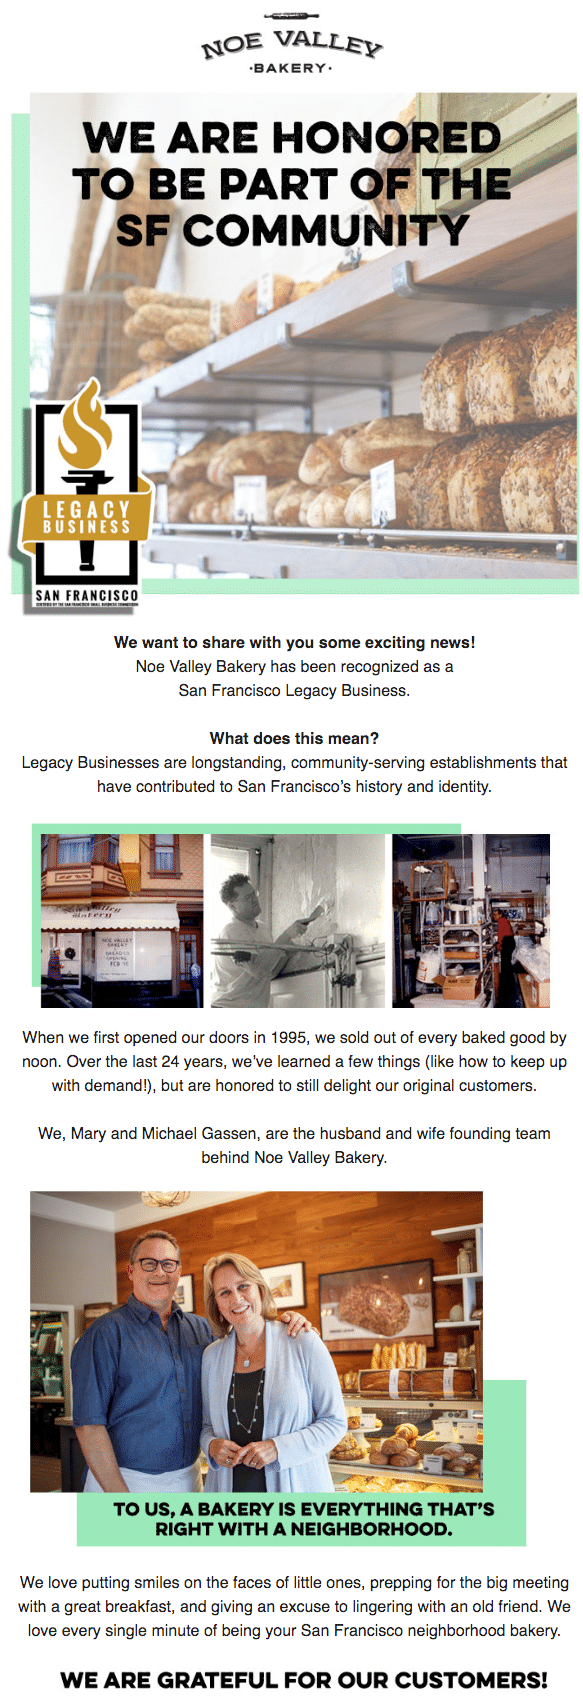 Small business tips - connect with your customers by sharing your story, just like this small business email example from Noe Valley Bakery.